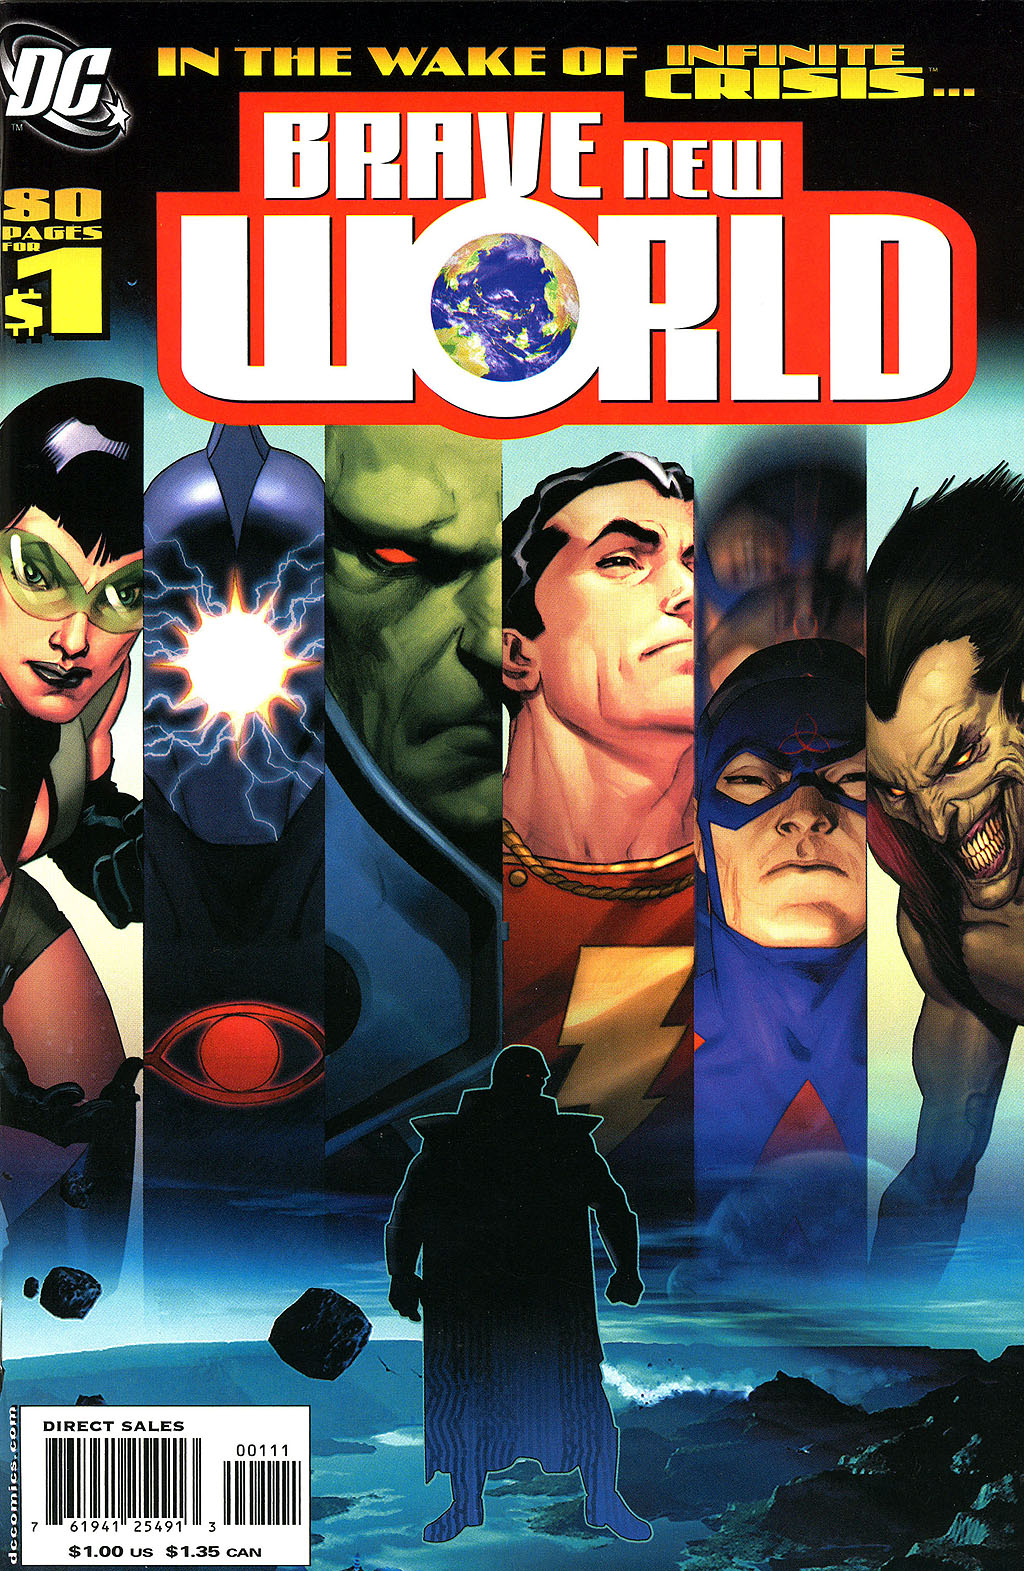 Read online DCU: Brave New World comic -  Issue # Full - 1